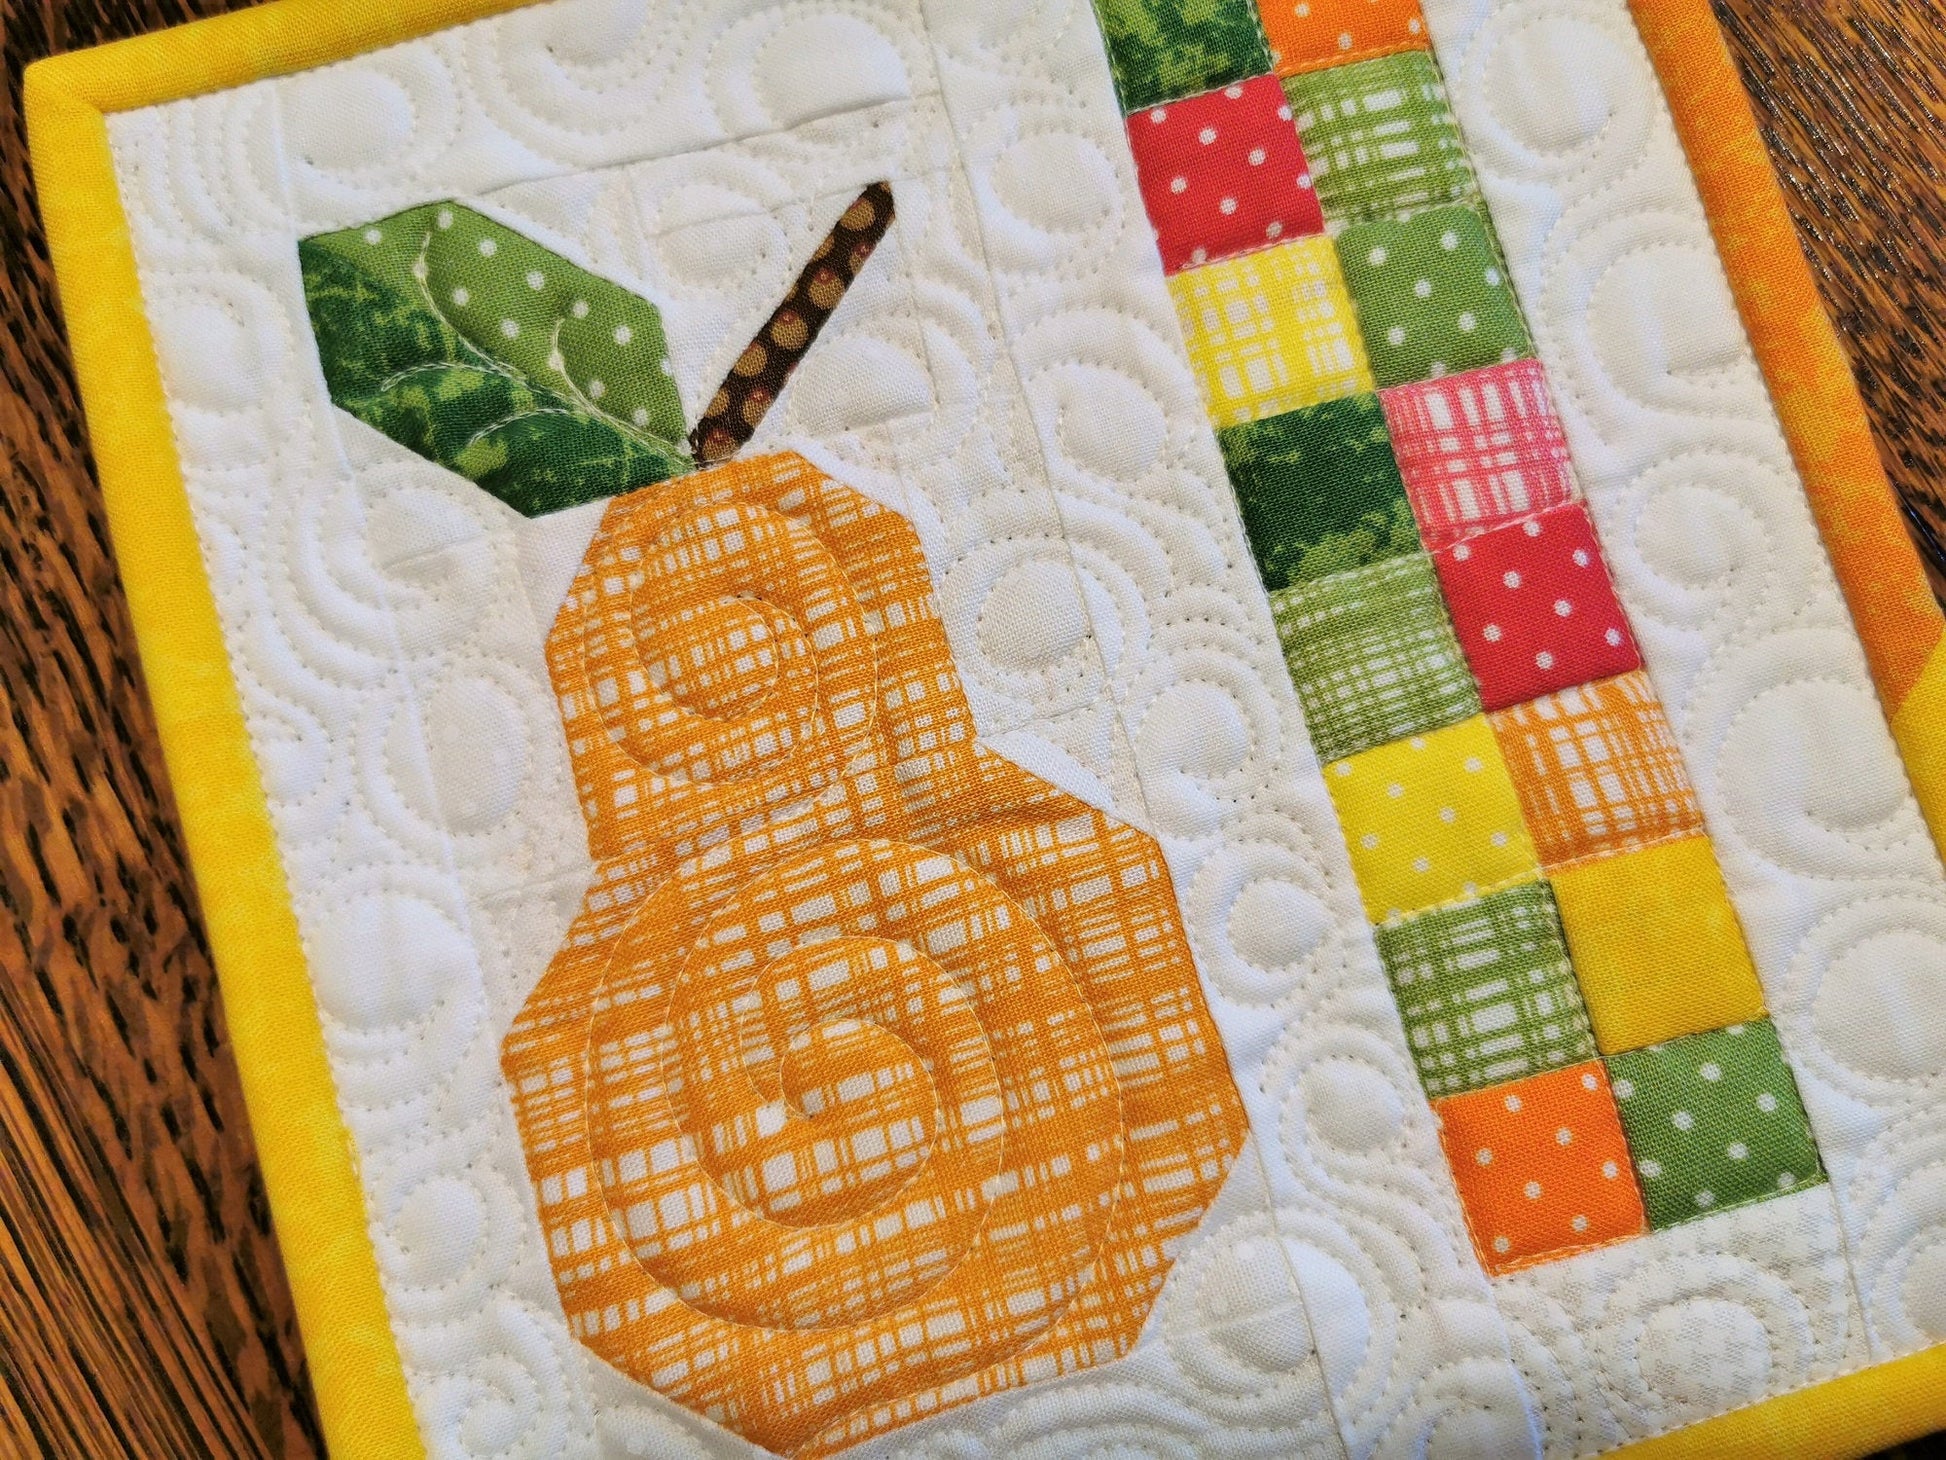 The tiny piecing in this patchwork pear and the custom quilting detail add up to an eye catching, one-of-a-kind charming little quilt. 